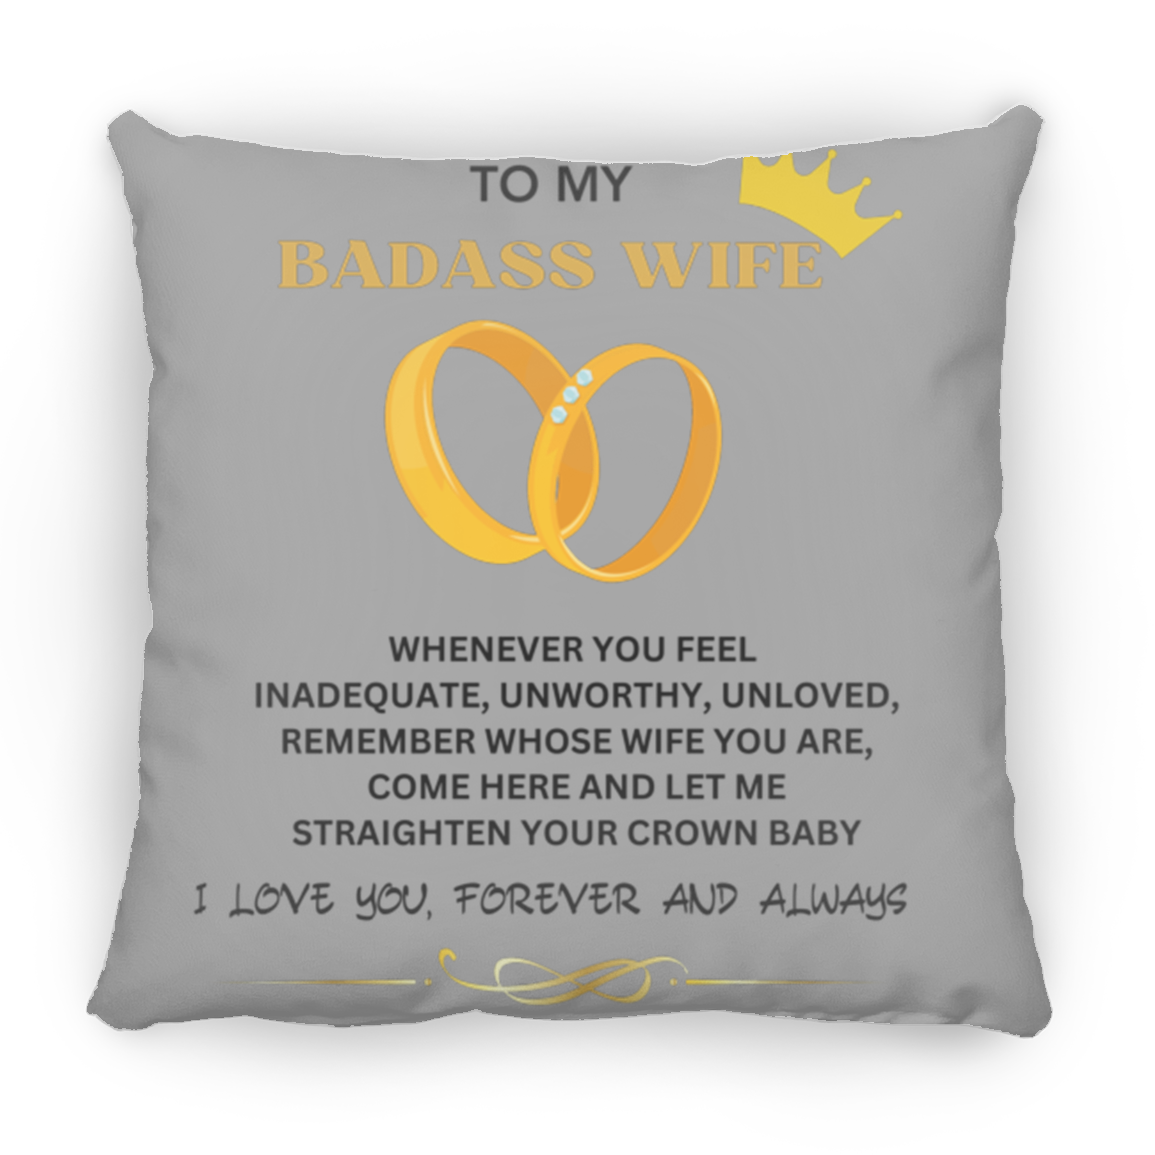 TO MY BADASS WIFE Square Pillow